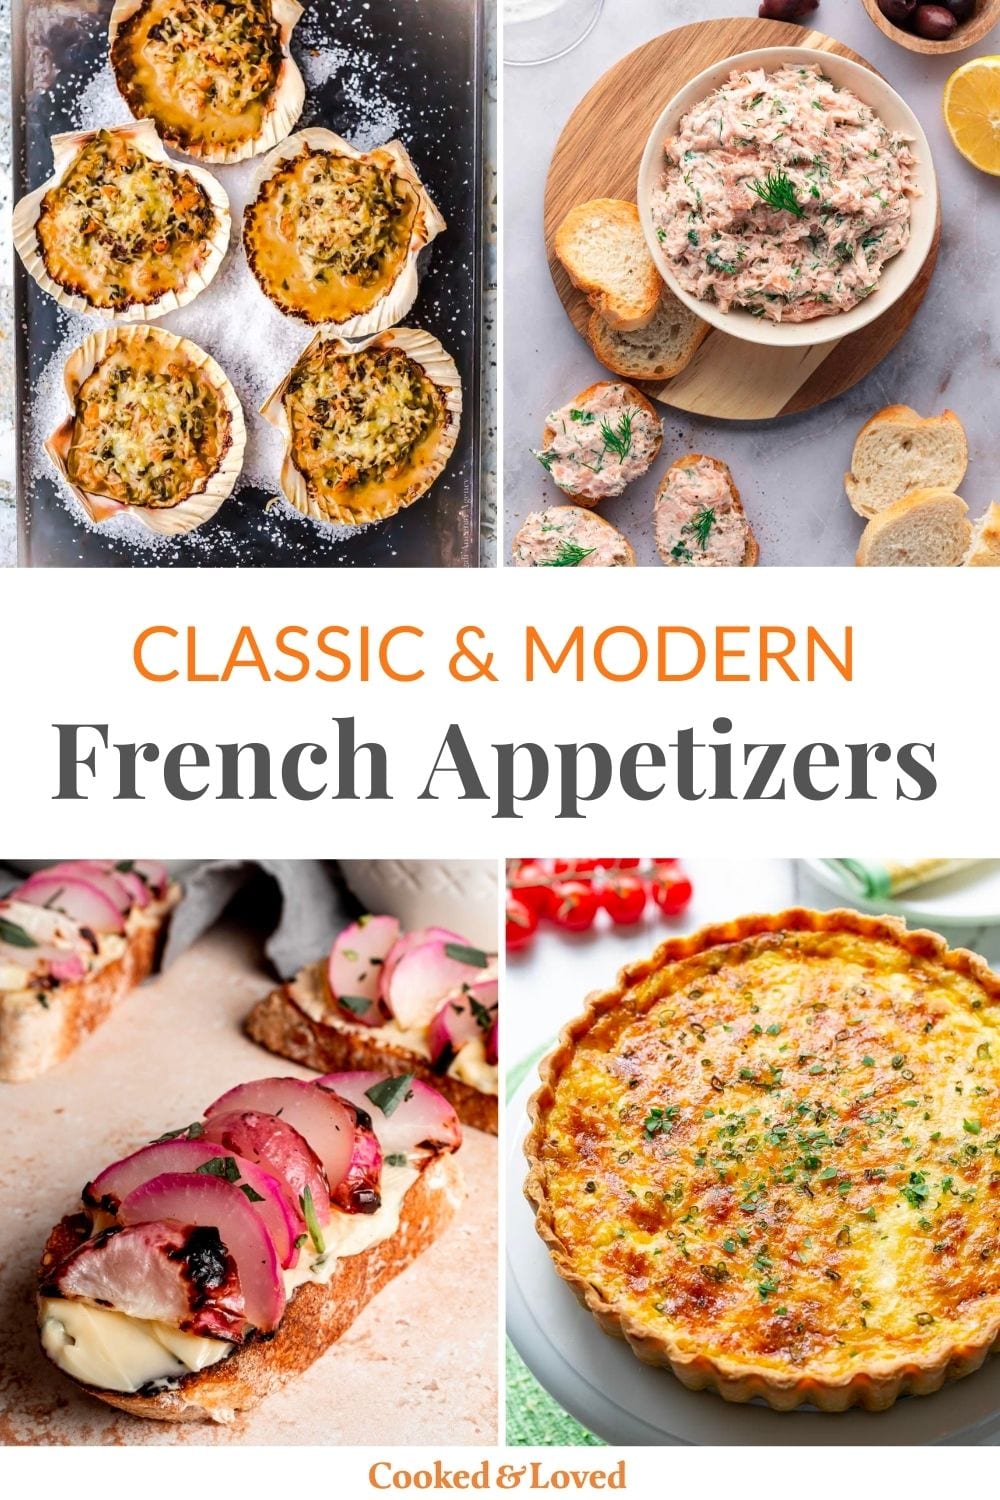 Best French Appetizers (Classic & Modern)